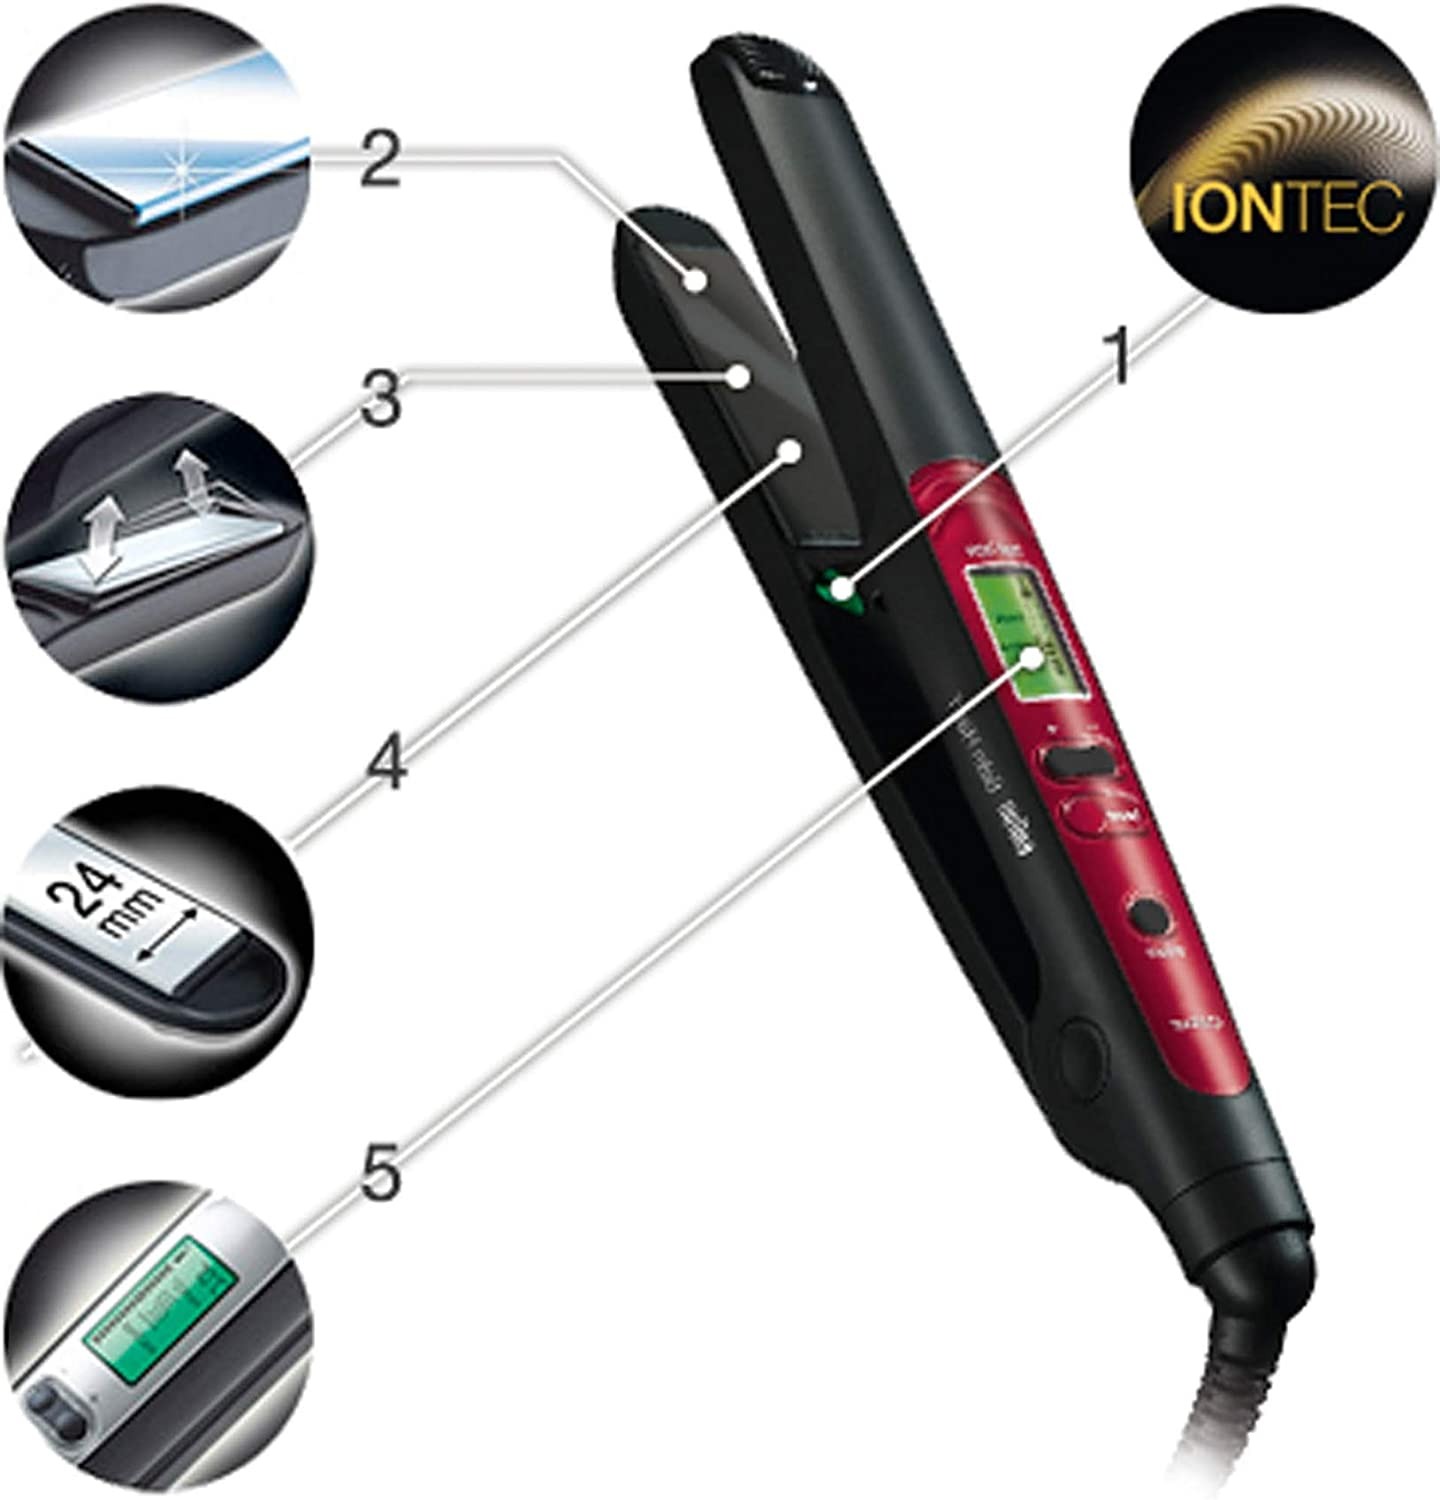 Braun Satin Hair 7 Hair Straightener With Color Saver And IONTEC  Technology, Red and Black – ST750 - PLUGnPOINT - The Marketplace